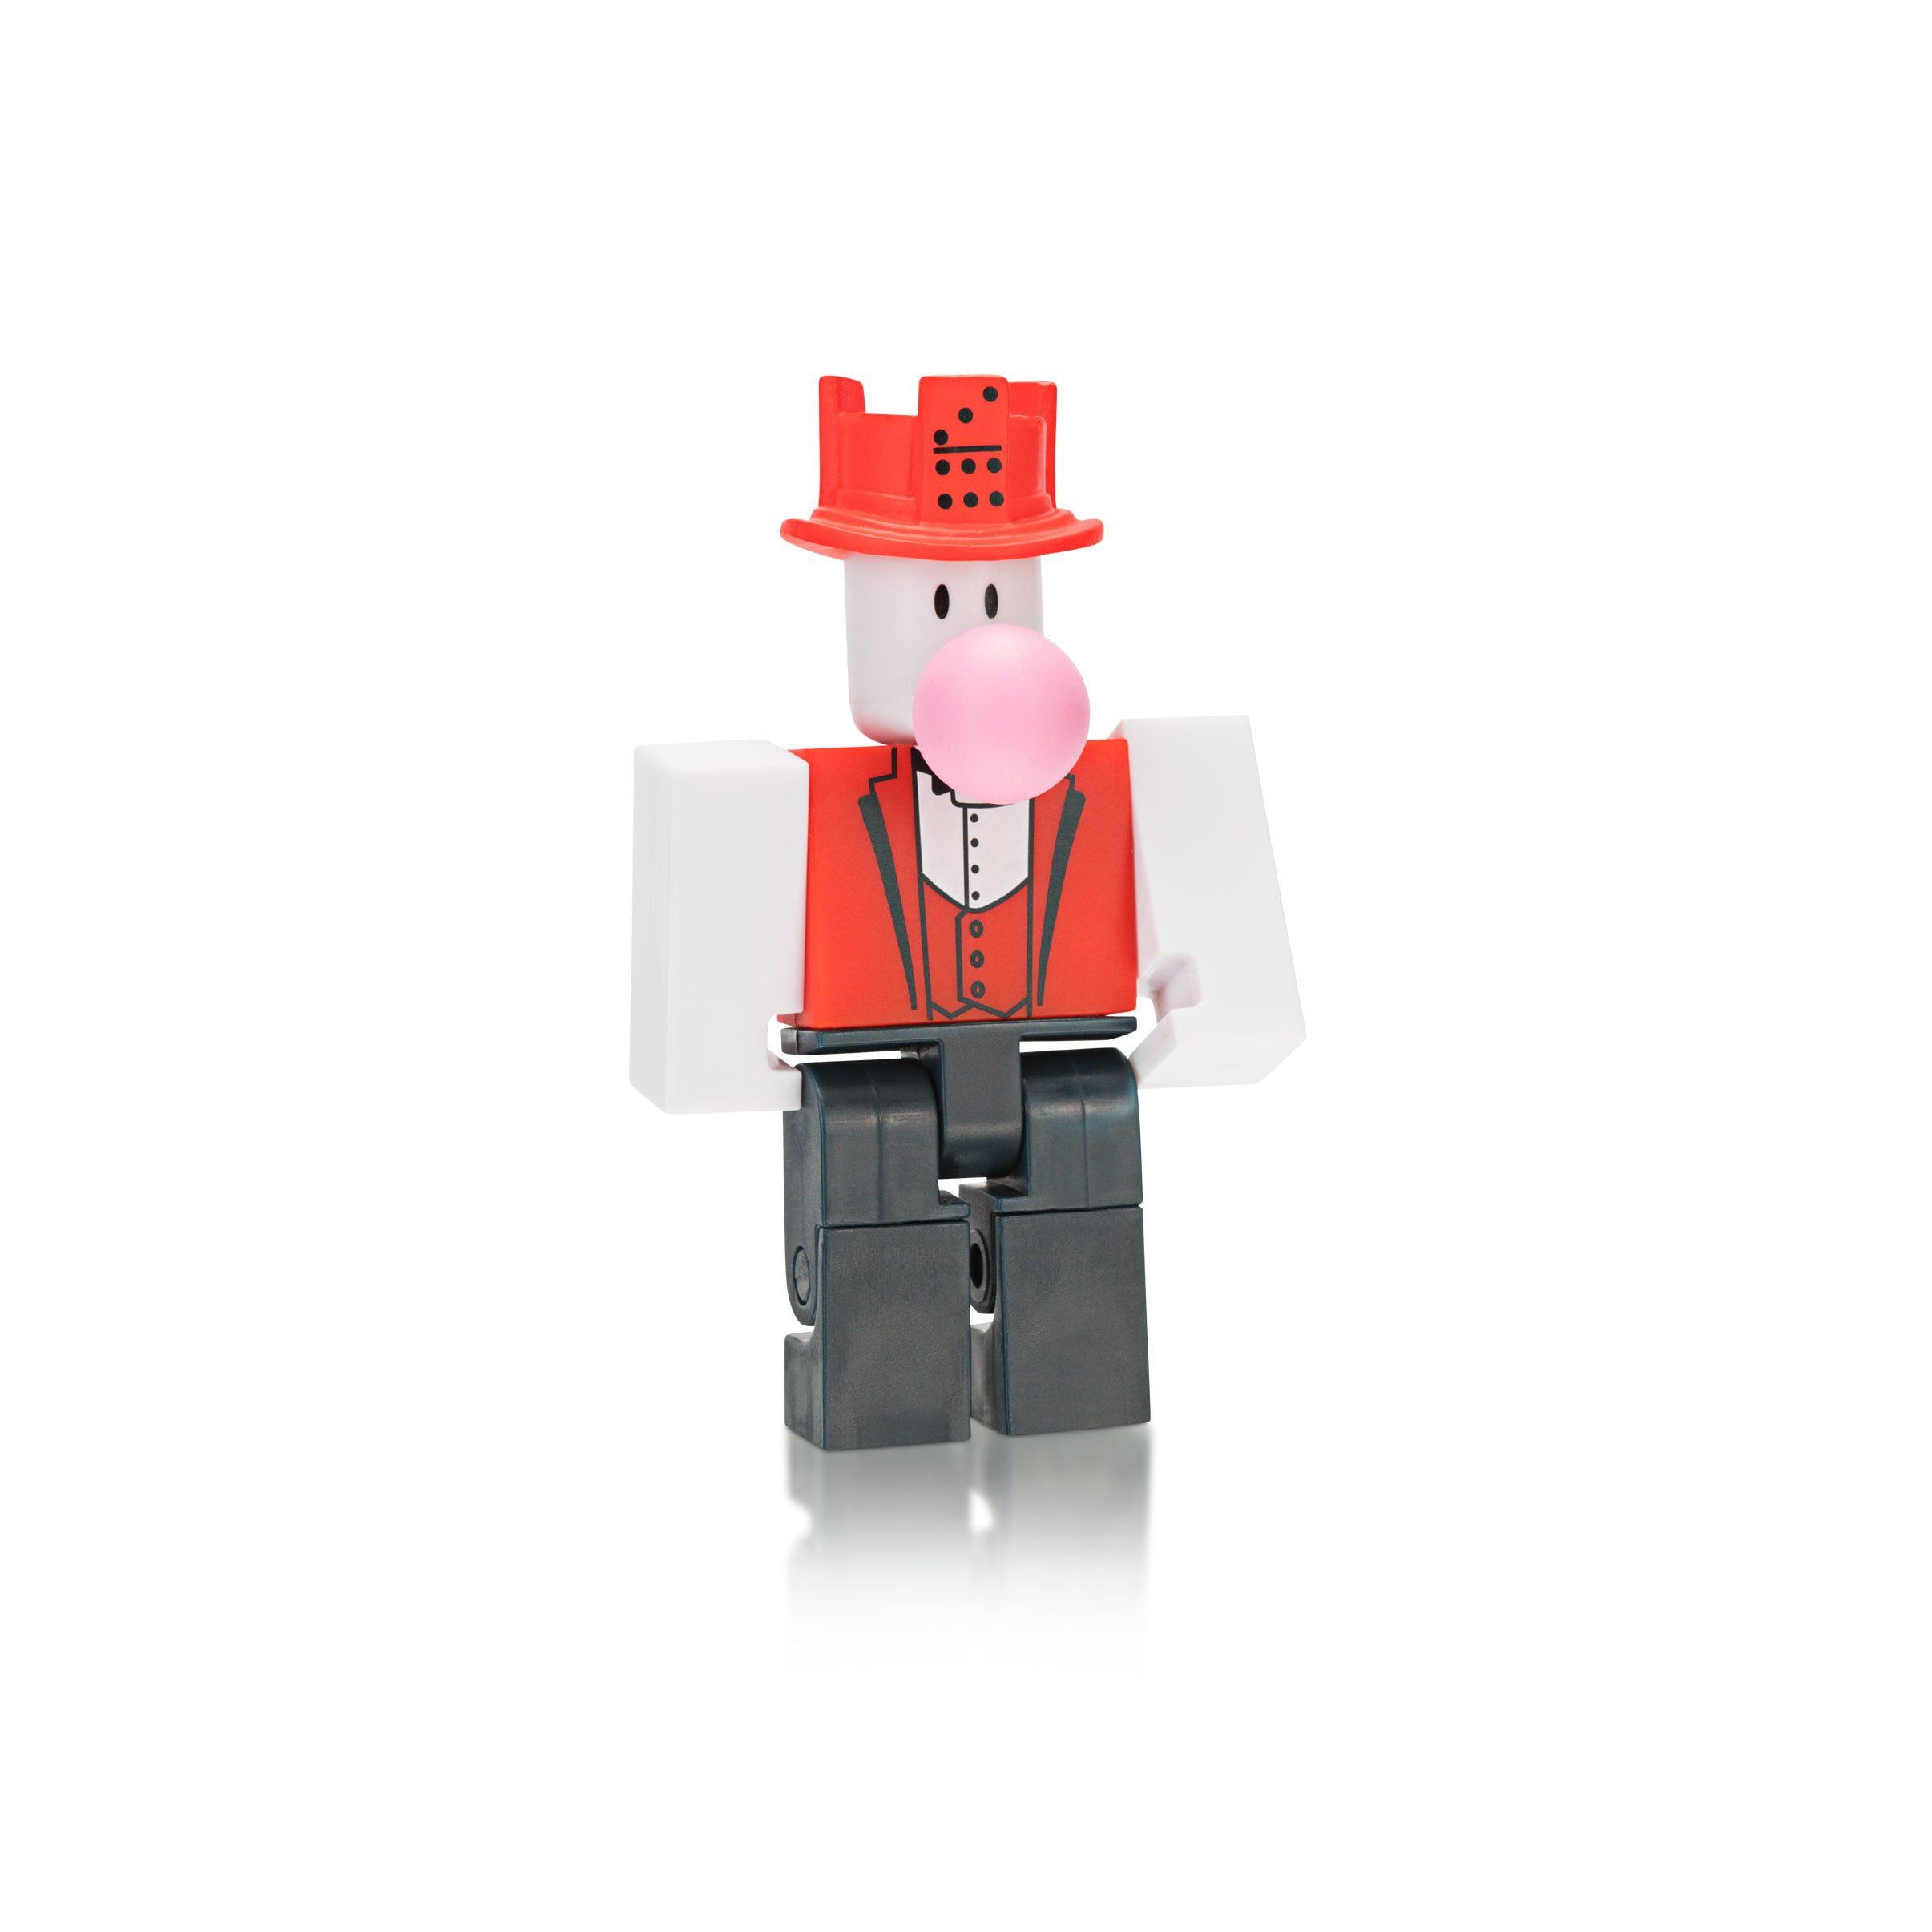 Roblox Action Collection Series 6 Mystery Figure Includes 1 Figure Exclusive Virtual Item Walmart Com Walmart Com - roblox toy walmart roblox toolbox classic board games